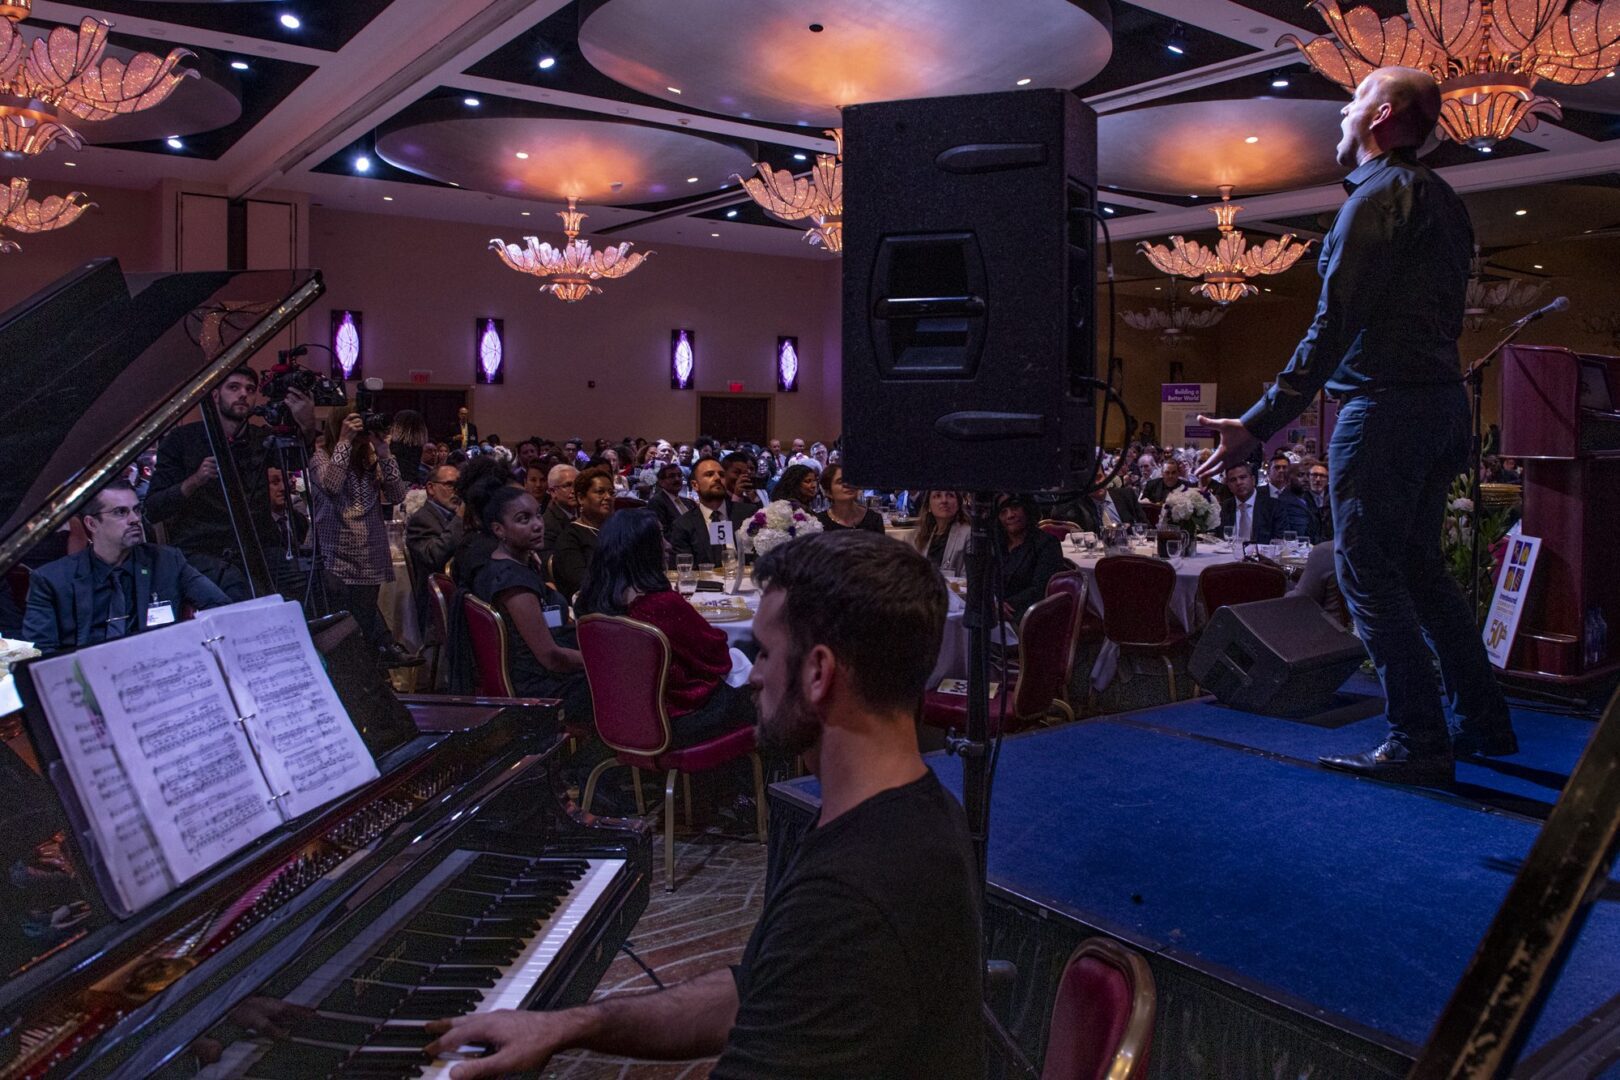 A man is playing a piano in front of a large group of people.